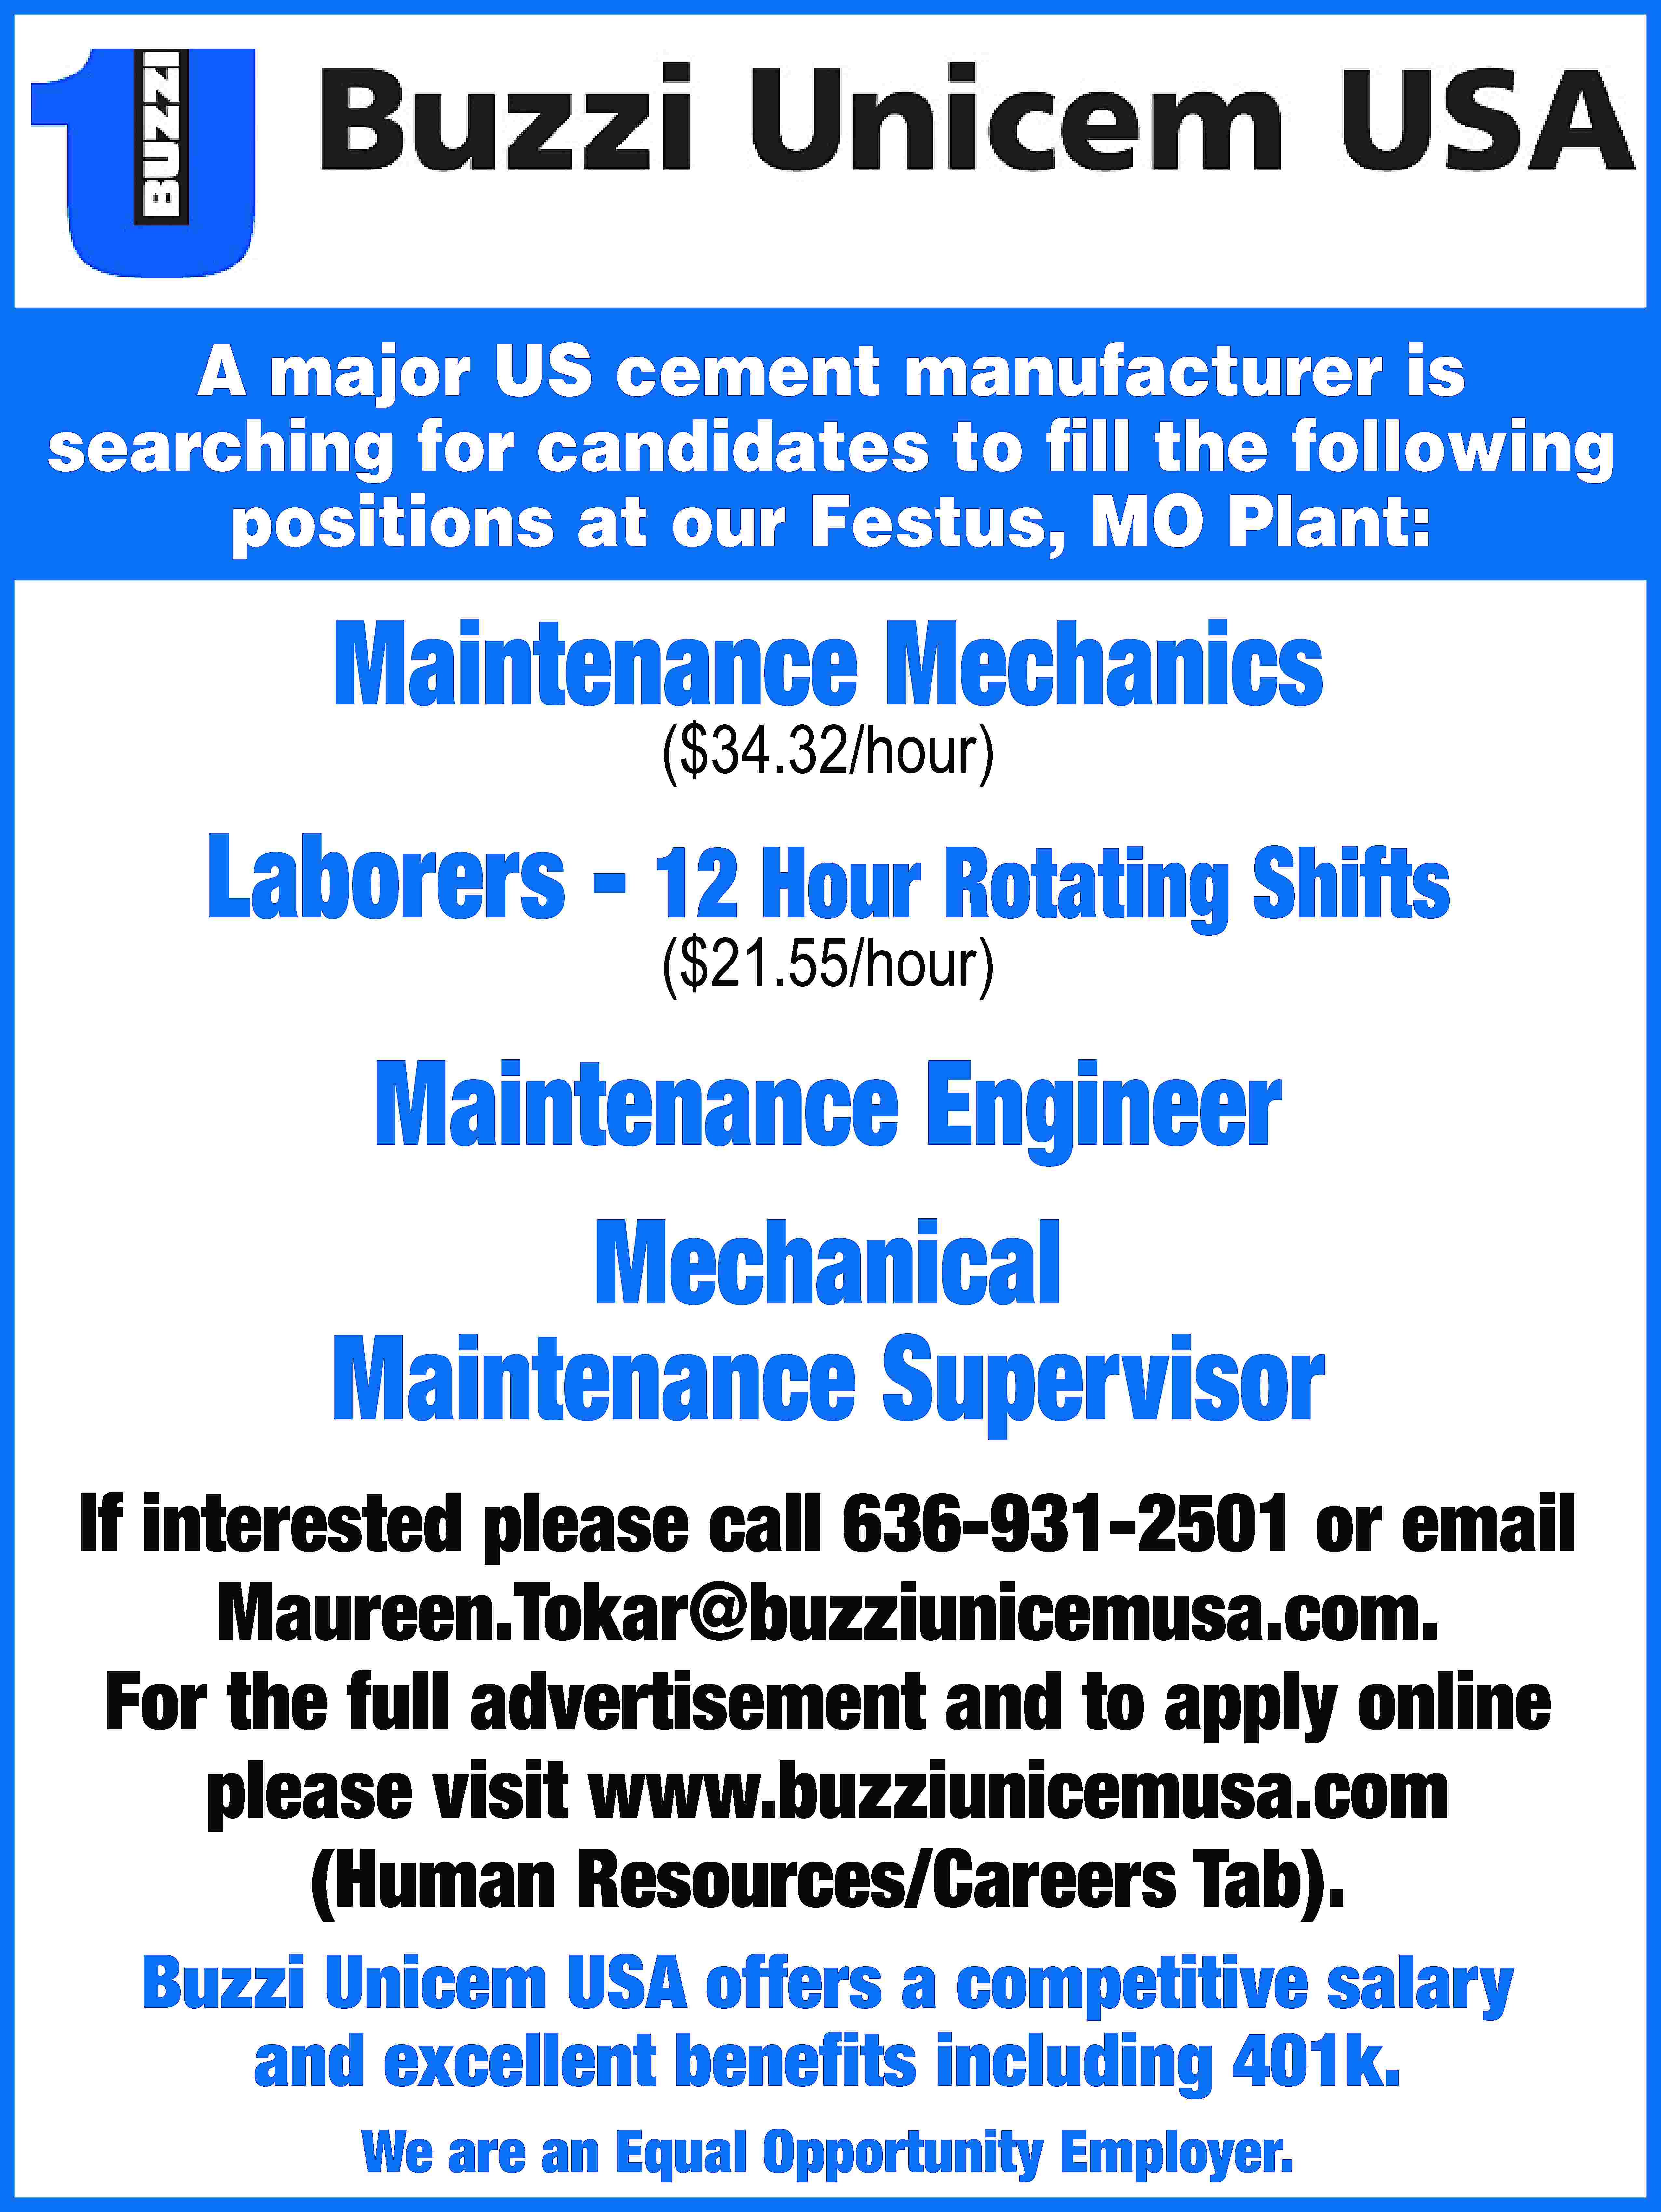 A major US cement manufacturer  A major US cement manufacturer is searching for candidates to fill the following positions at our Festus, MO Plant: Maintenance Mechanics ($34.32/hour) Laborers - 12 Hour Rotating Shifts ($21.55/hour) Maintenance Engineer Mechanical Maintenance Supervisor If interested please call 636-931-2501 or email Maureen.Tokar@buzziunicemusa.com. For the full advertisement and to apply online please visit www.buzziunicemusa.com (Human Resources/Careers Tab). Buzzi Unicem USA offers a competitive salary and excellent benefits including 401k. We are an Equal Opportunity Employer.